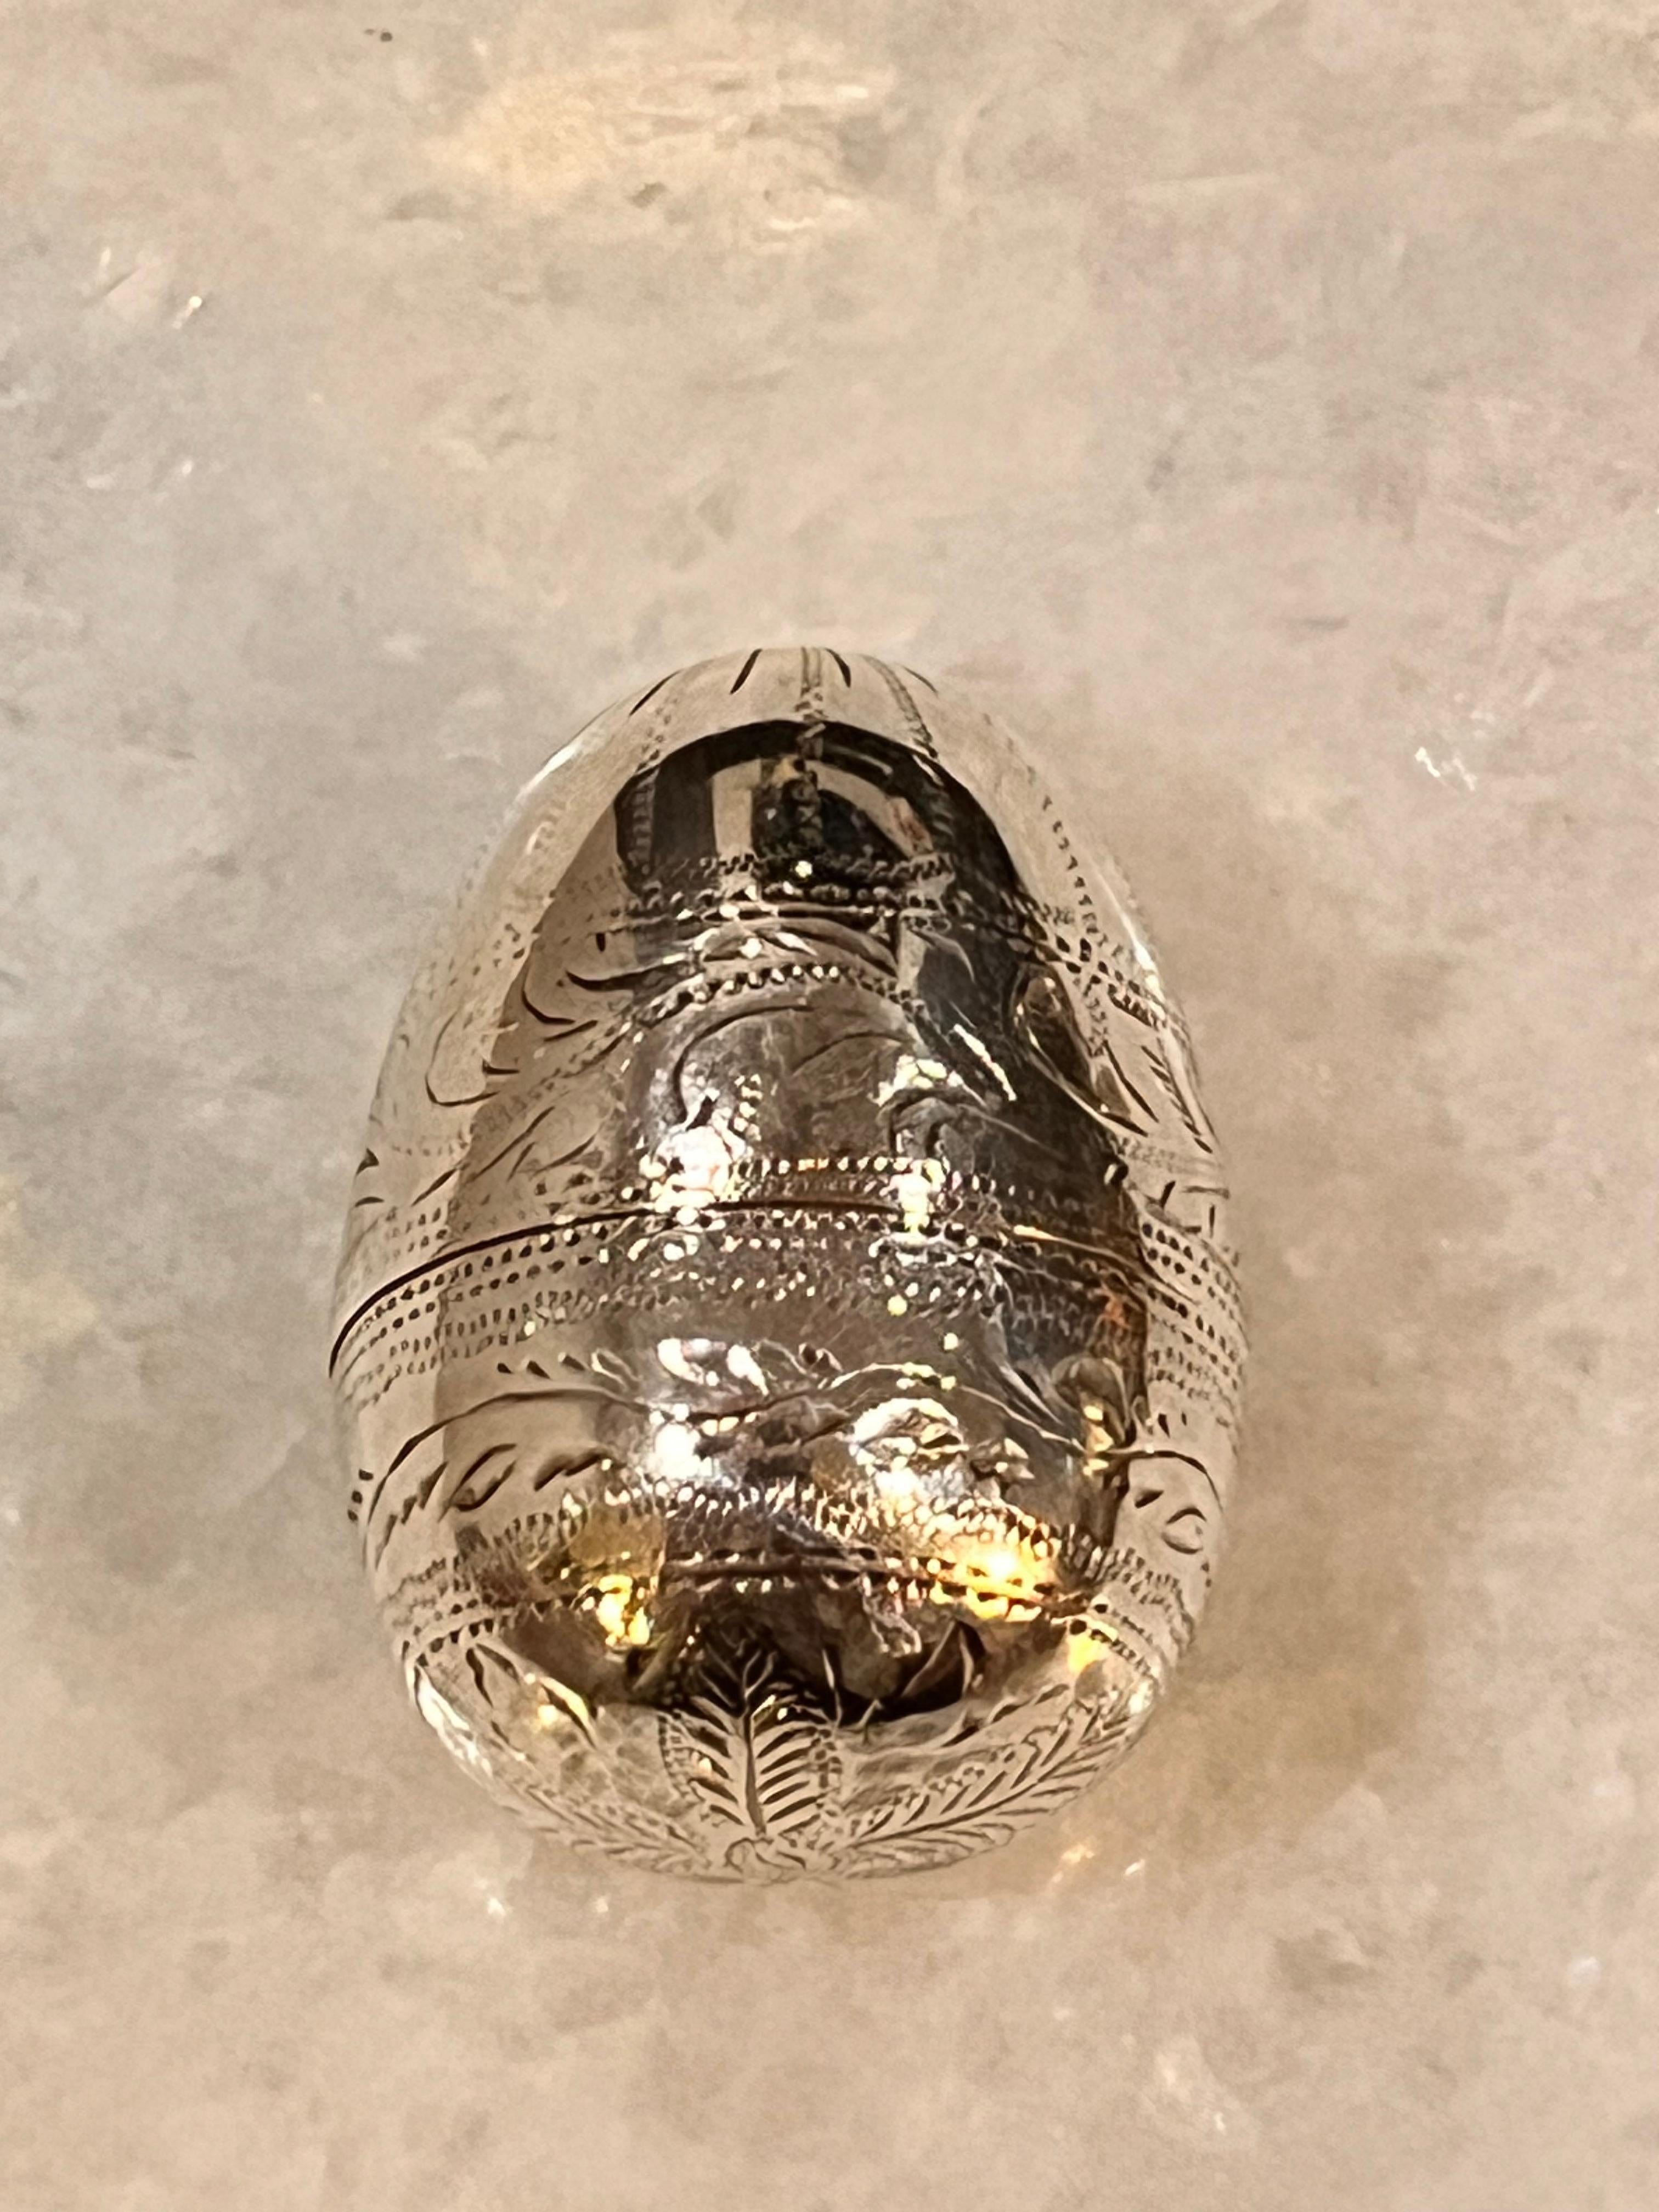 A George III silver egg form nutmeg grater, the exterior finely decorated with bright cutting depicting foliate scrolls, with the tapering end decorated with intricate fluting. The detachable cover is similarly decorated and surmounted by a quartet